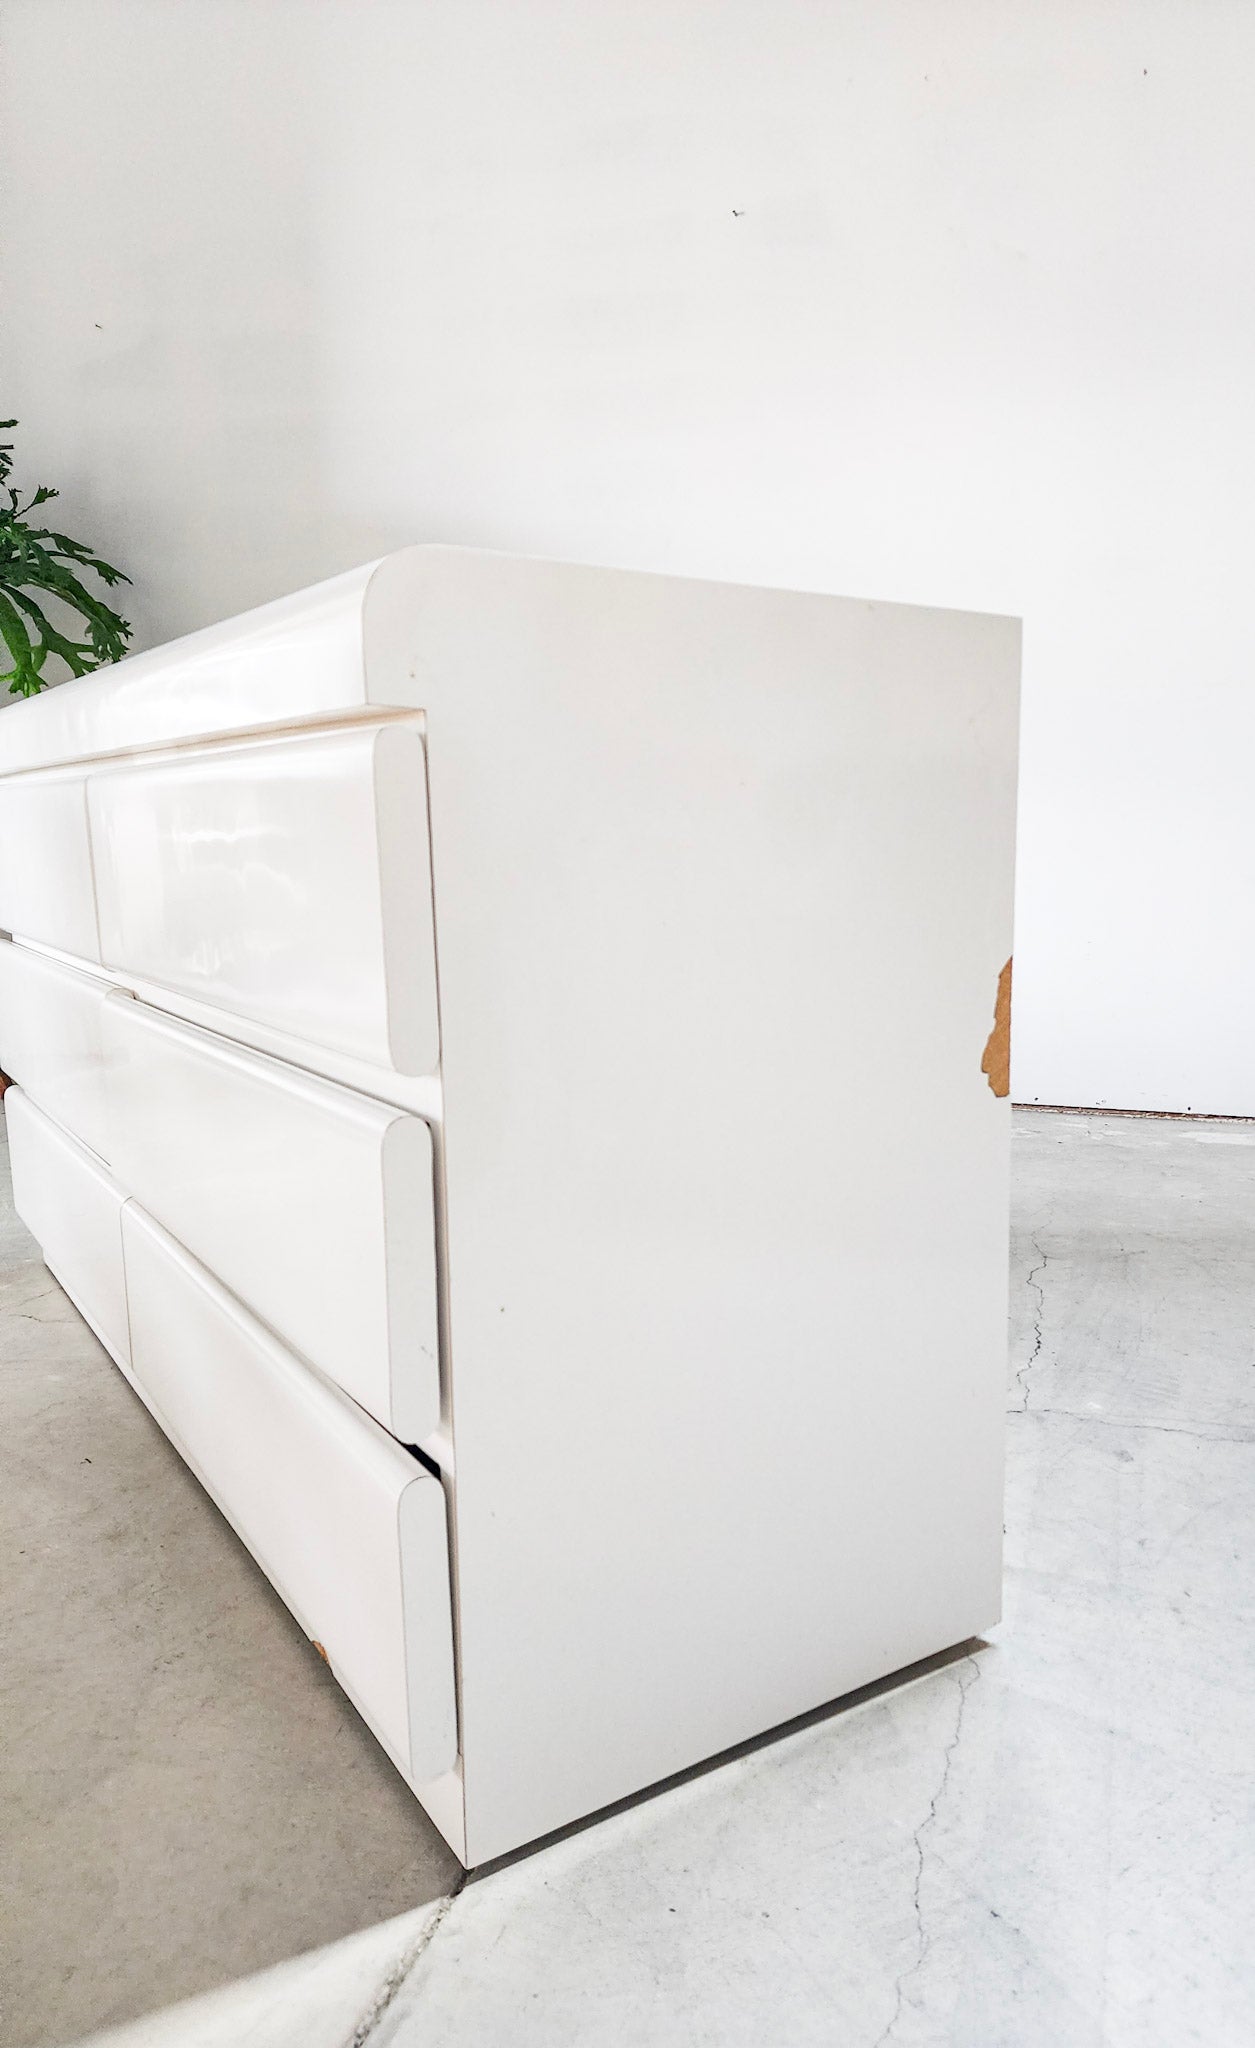 Lacquered Waterfall White Dresser - Reclaimed Mt. Goods